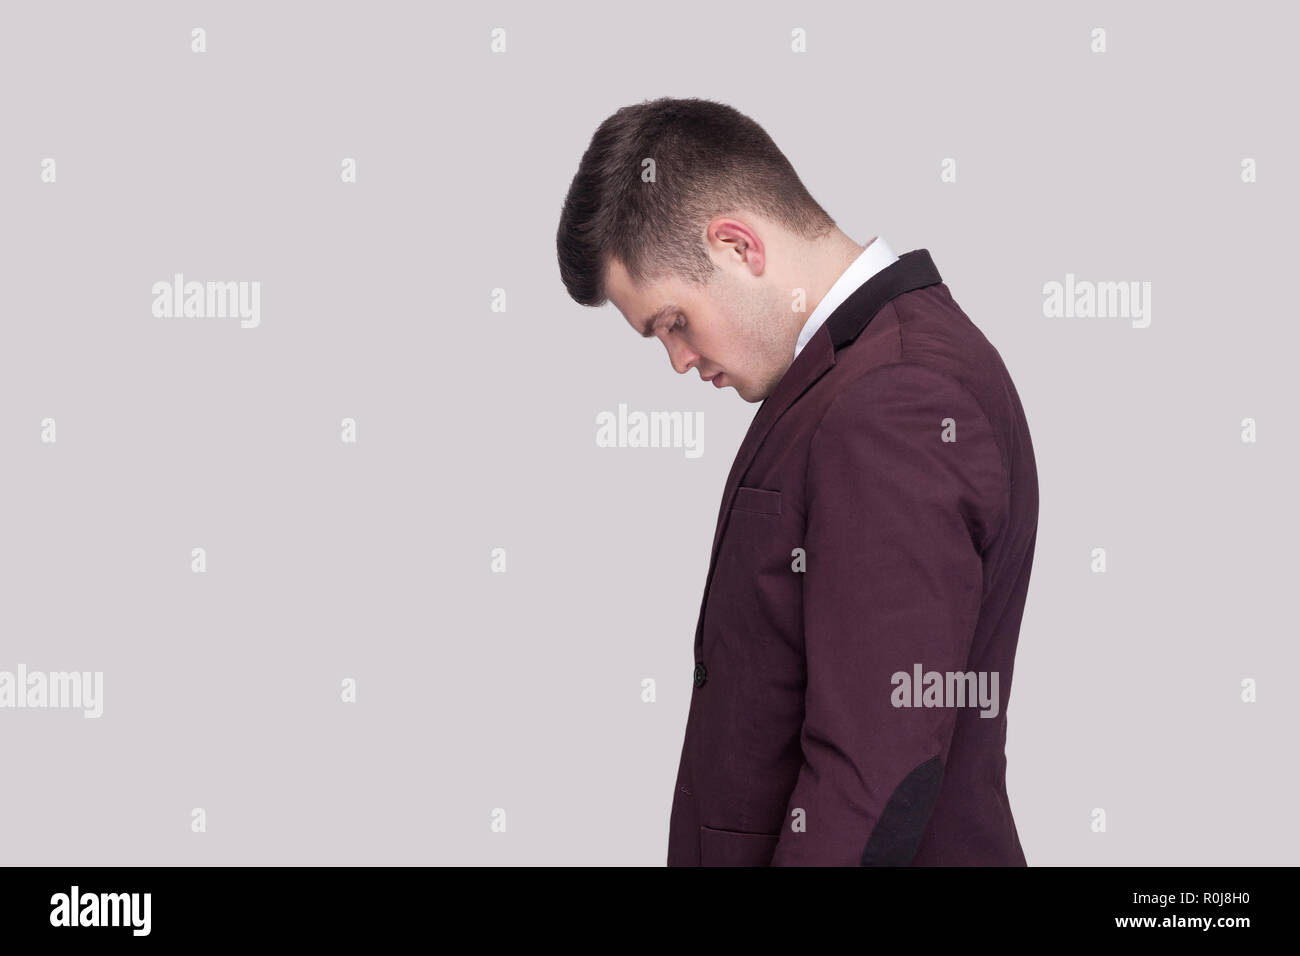 Profile side view portrait of sad handsome young man in violet suit and white shirt, standing and looking down with head down and bad mood. indoor stu Stock Photo